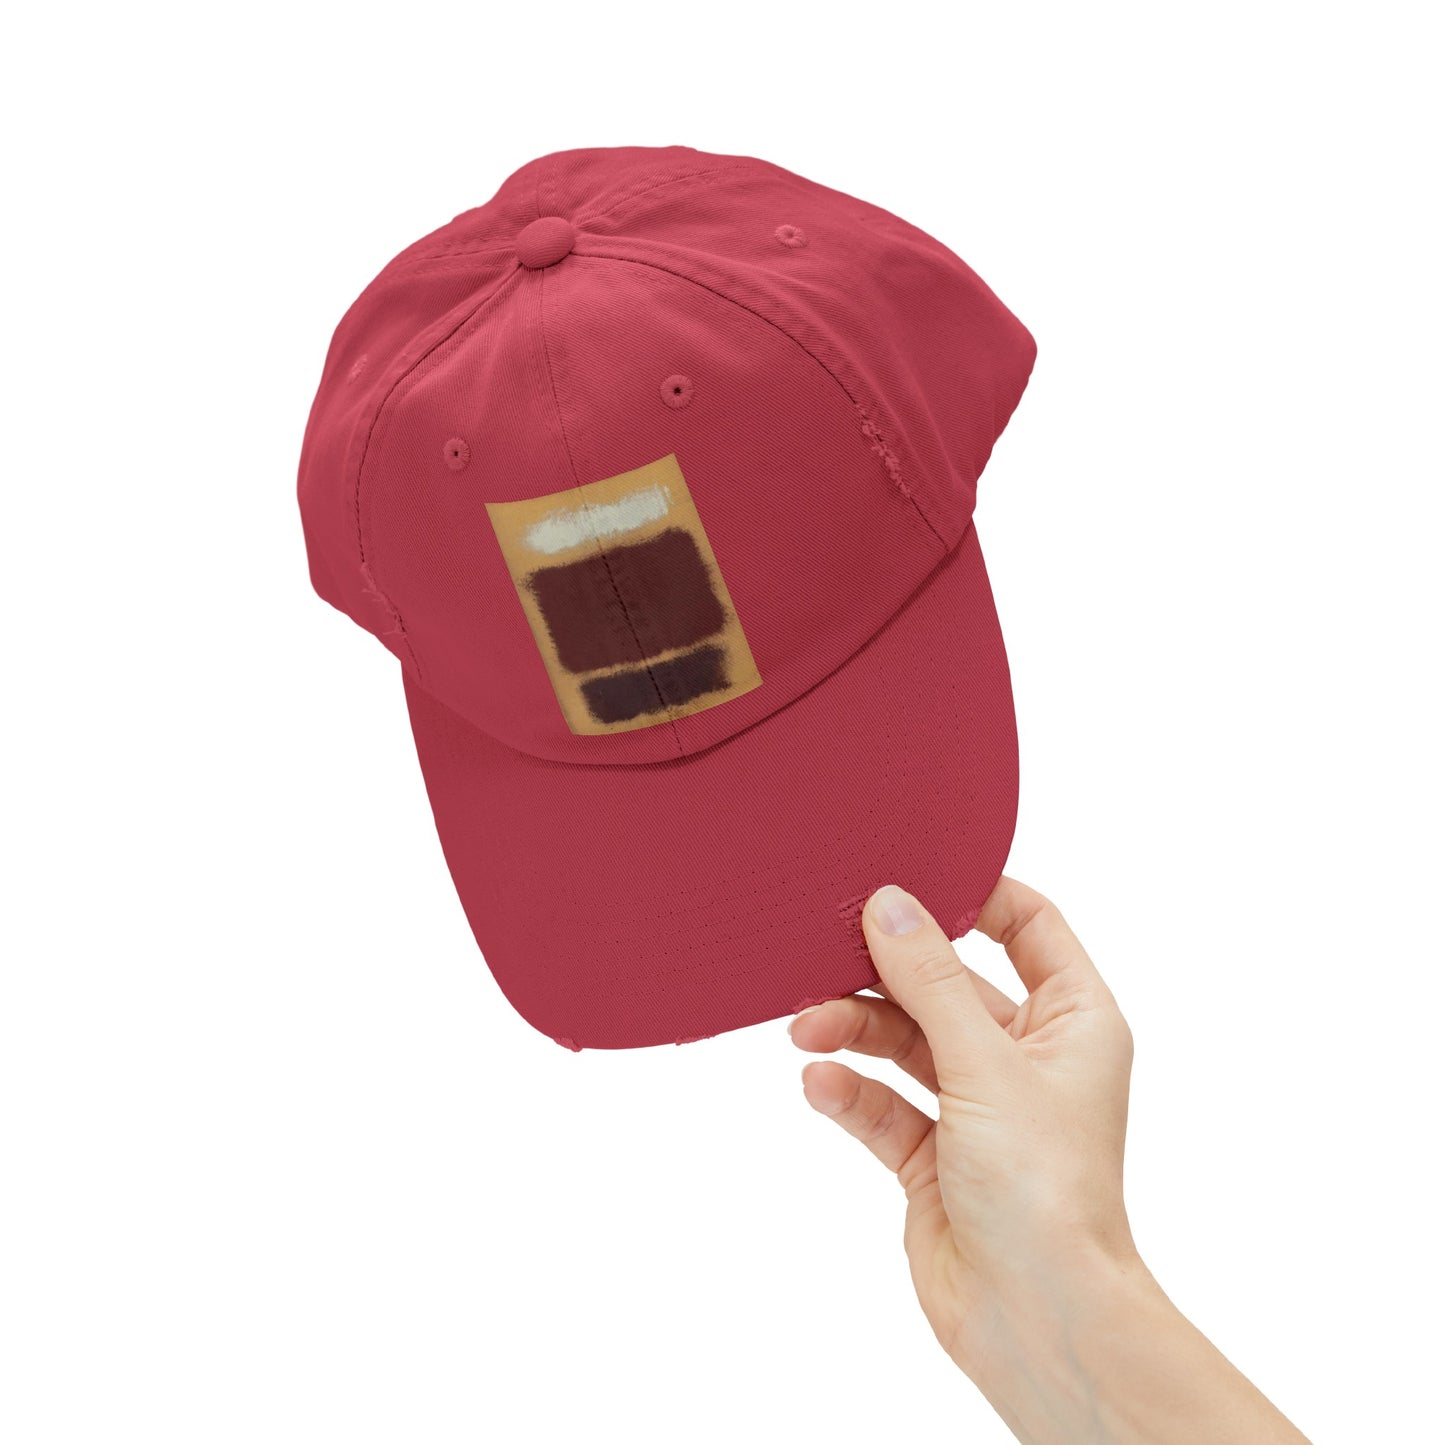 a person holding a red hat with a brown patch on it